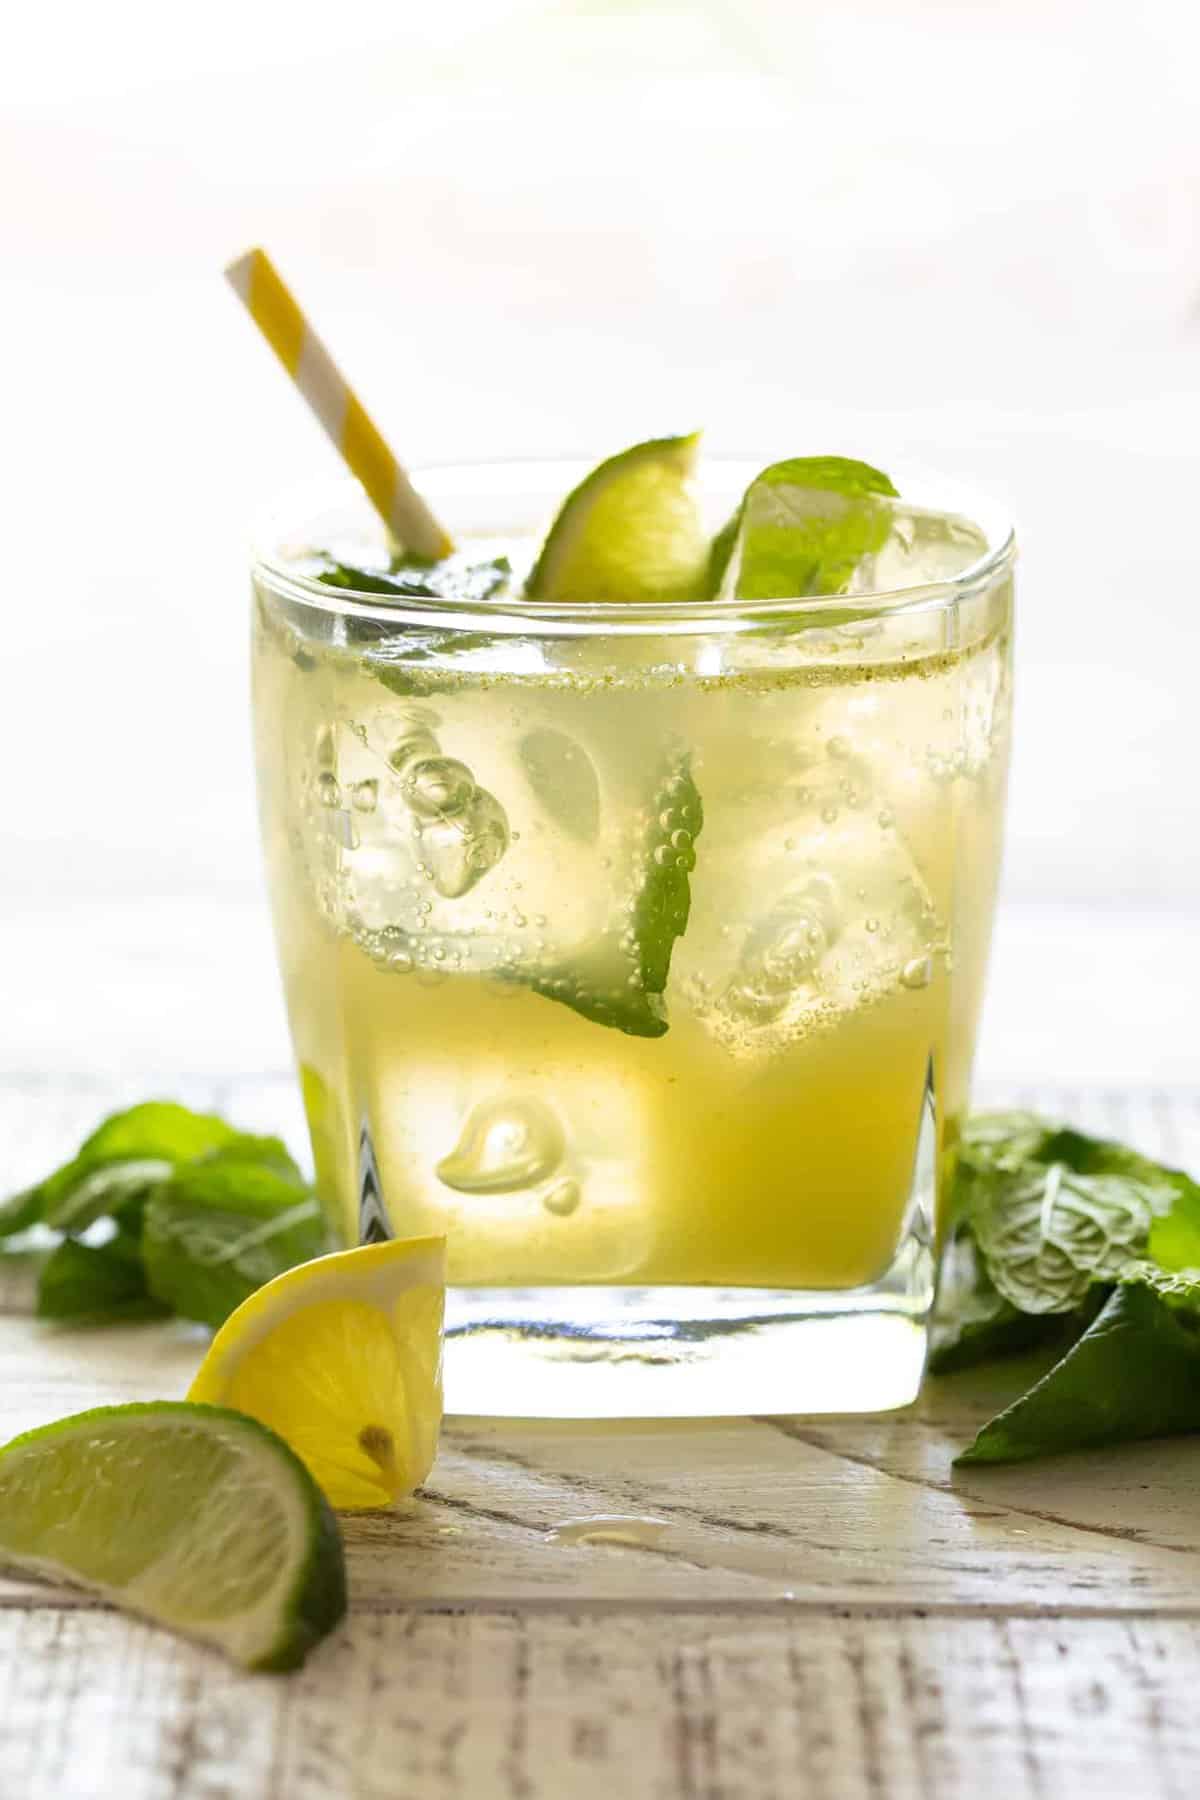 bootlegger drink in a small glass with fresh citrus and mint